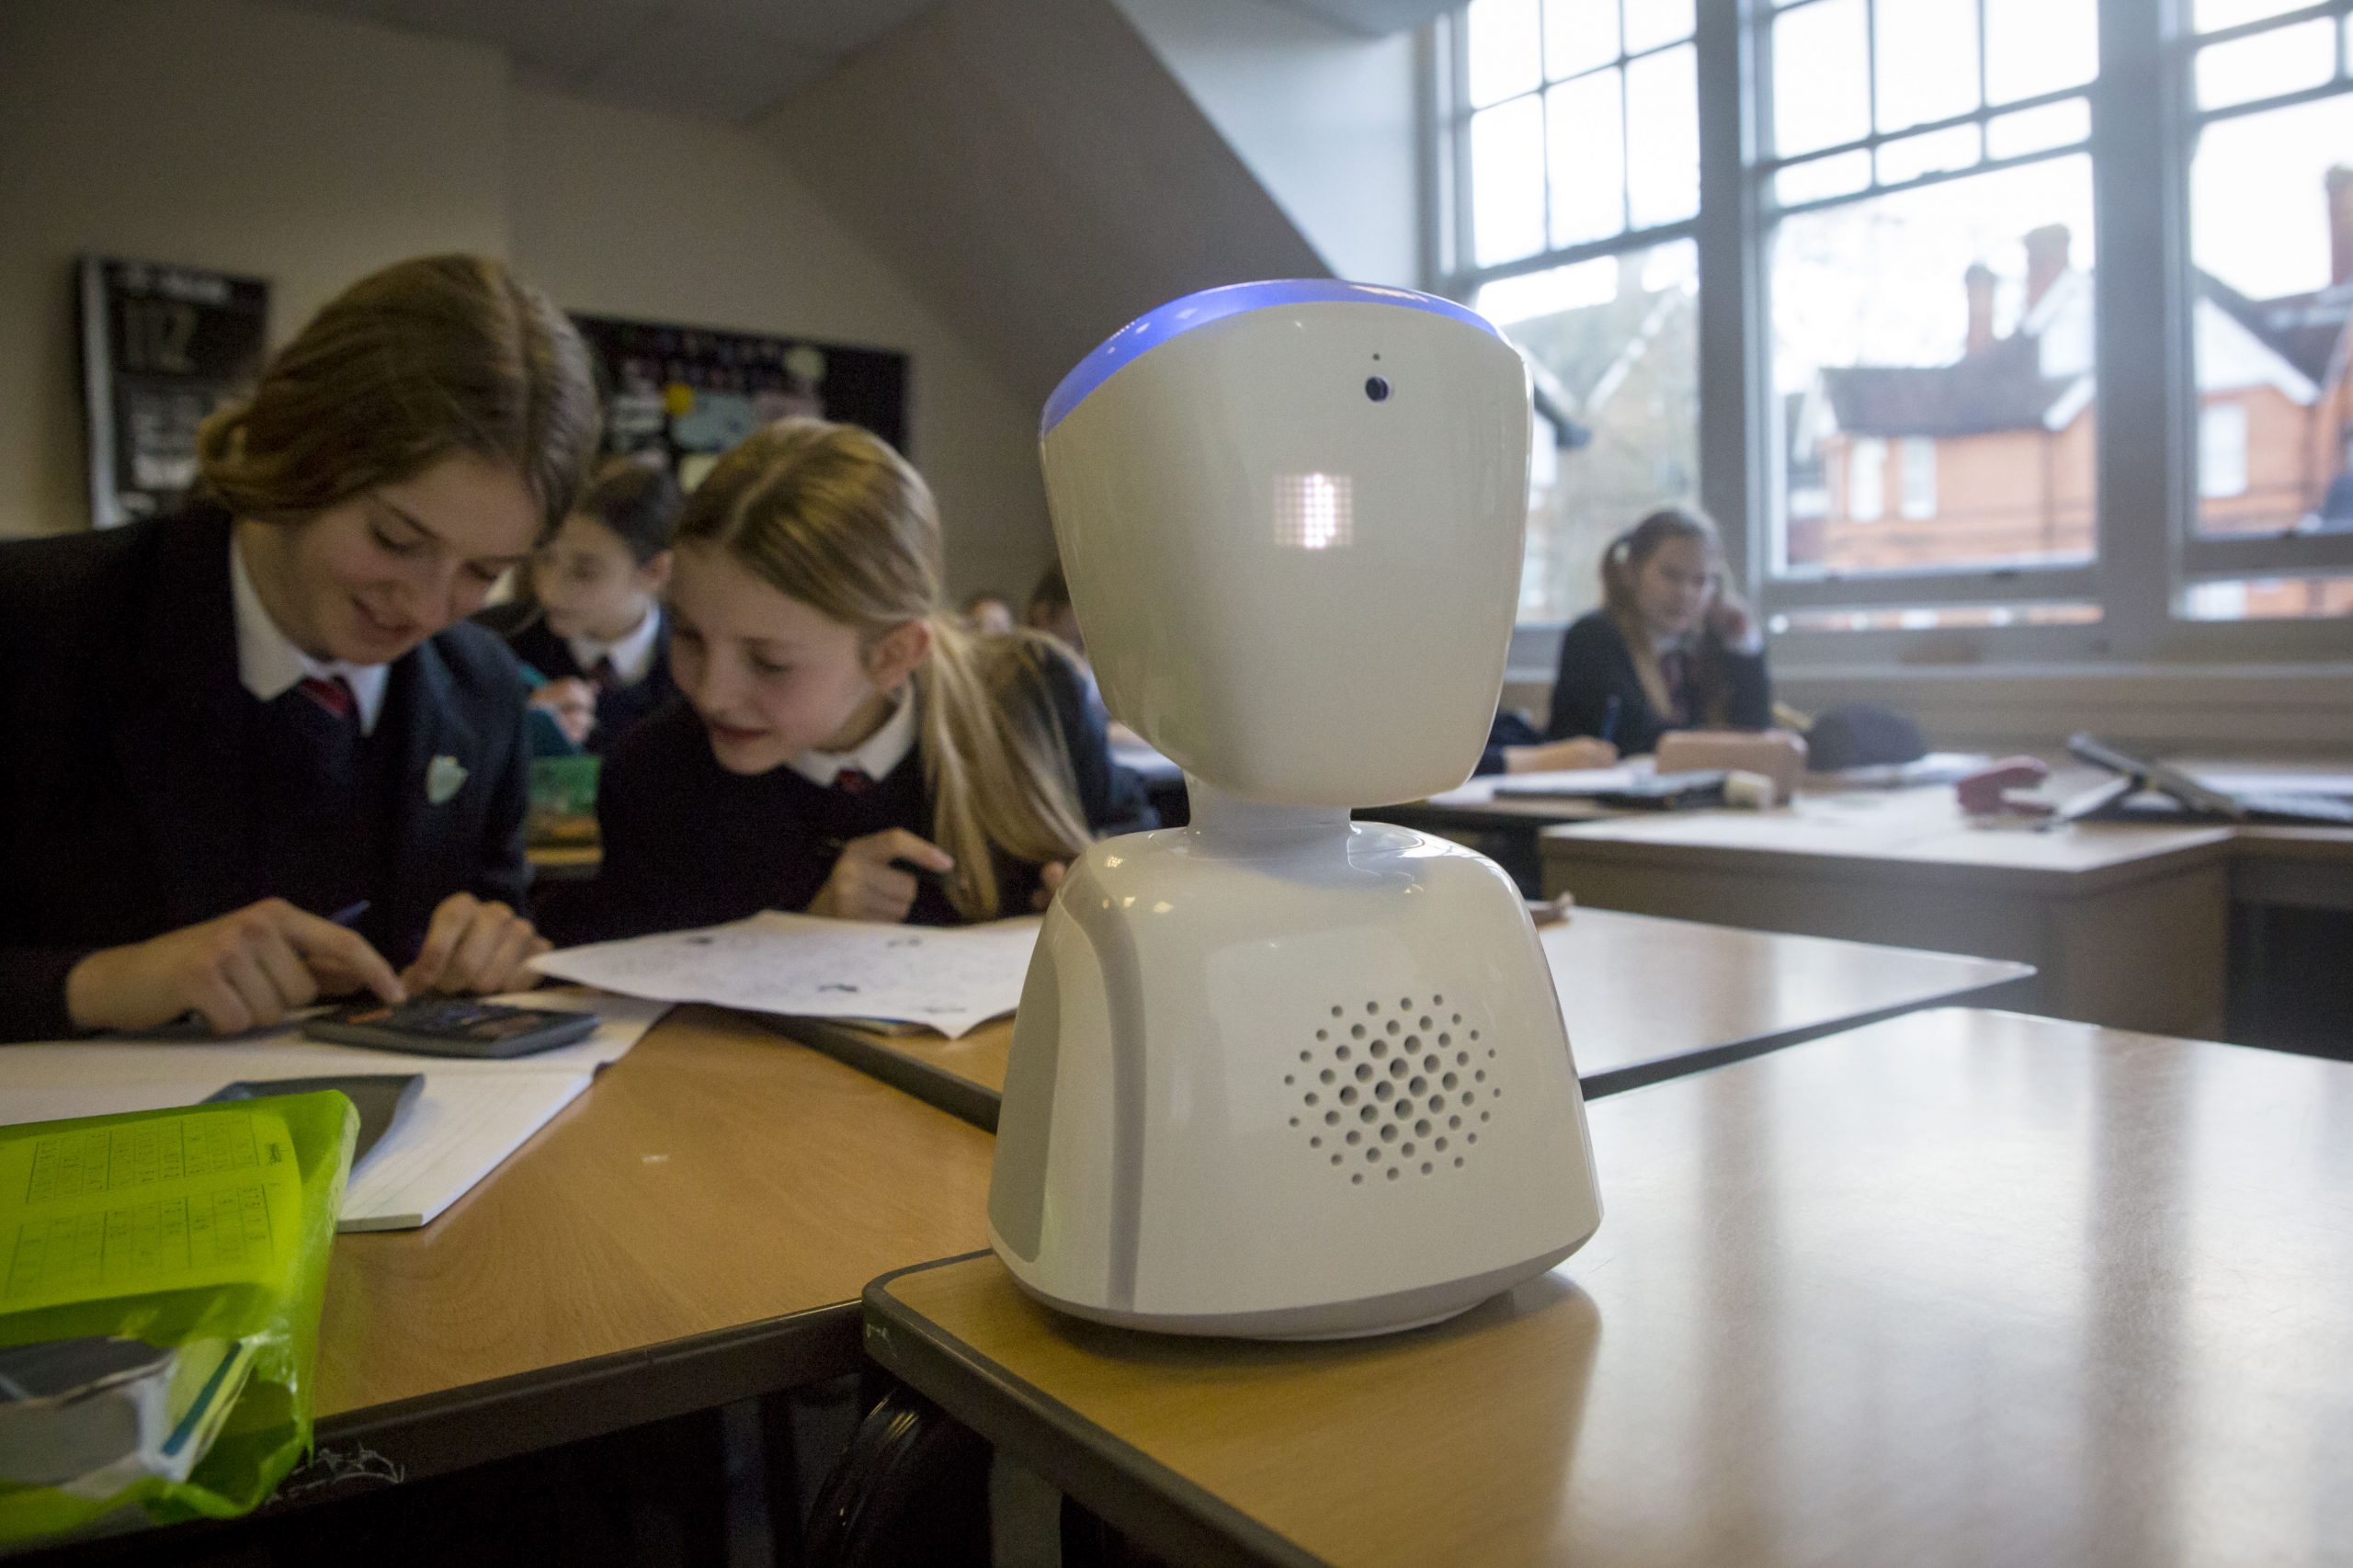 Robot technology transforms access to learning for pupils in need